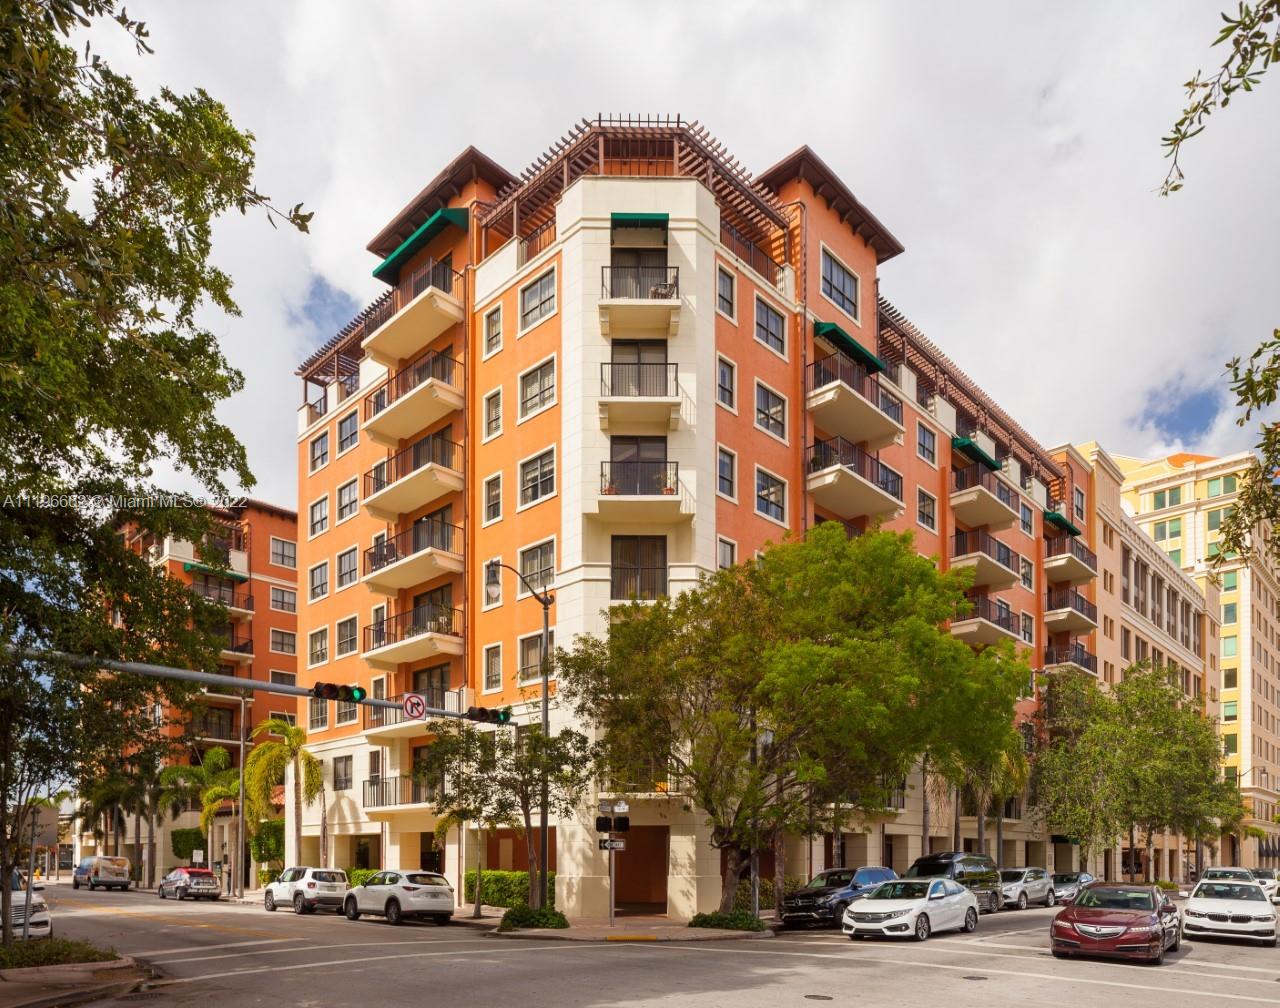 Totally pristine and immaculate unit at one of Coral Gables most favorite boutique buildings: 100 Andalusia is now available. Located just one block from Miracle Mile and all that Downtown Coral Gables has to offer. This 2-bedroom, 2.5 bath North-facing unit has spacious walk-in closets, a balcony, a separate air-conditioned storage space, and assigned, covered, secure parking on the same floor as the unit. Known for its lush courtyard and fountain, the building also boasts a 24-hour concierge, gym, billiard and party rooms, and on-site management. Urban living in the City Beautiful!